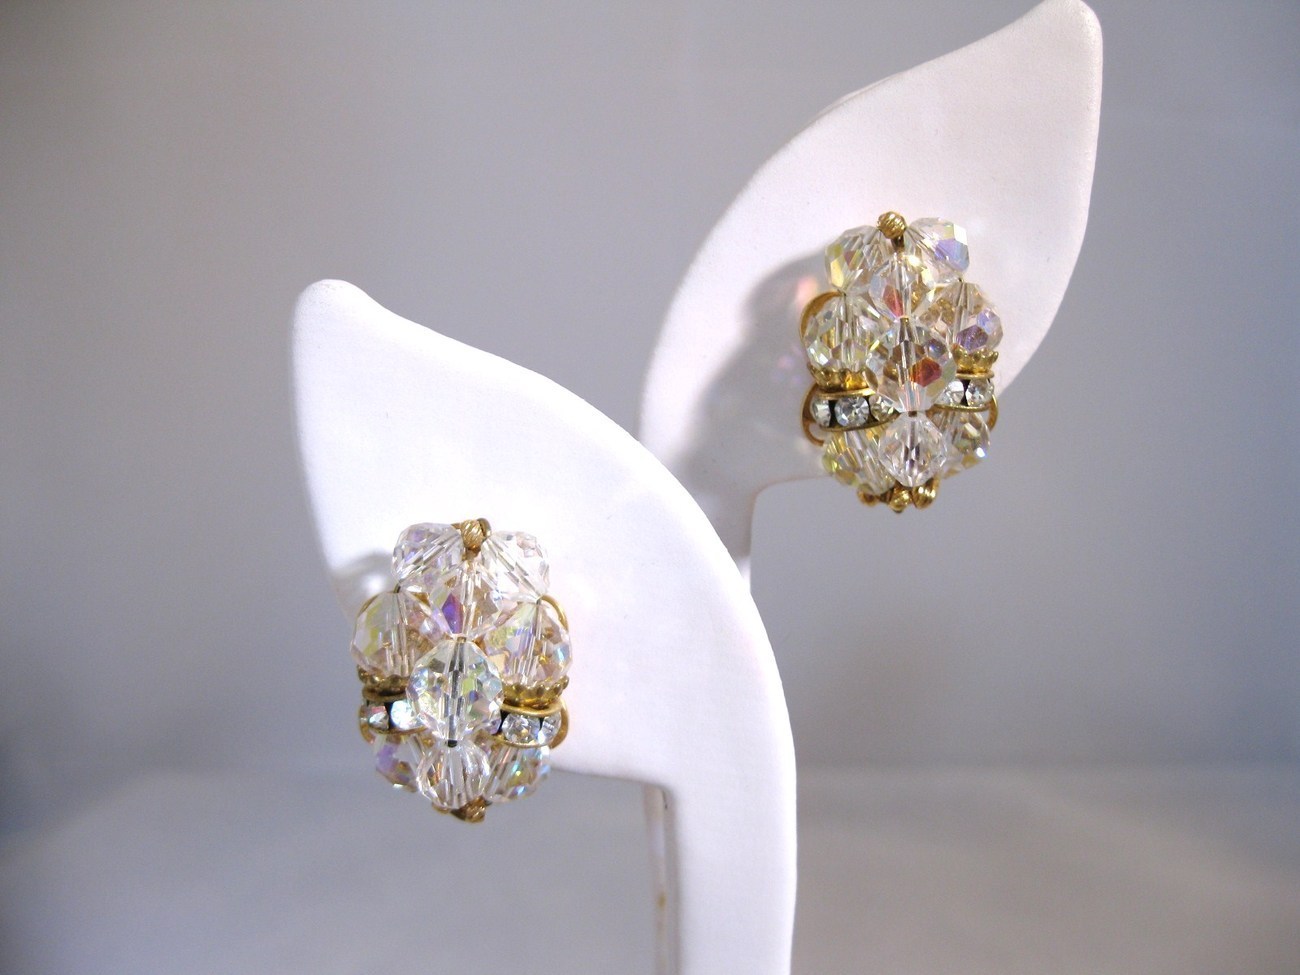 Primary image for Aurora borealis clip on earrings with crystal rondeles